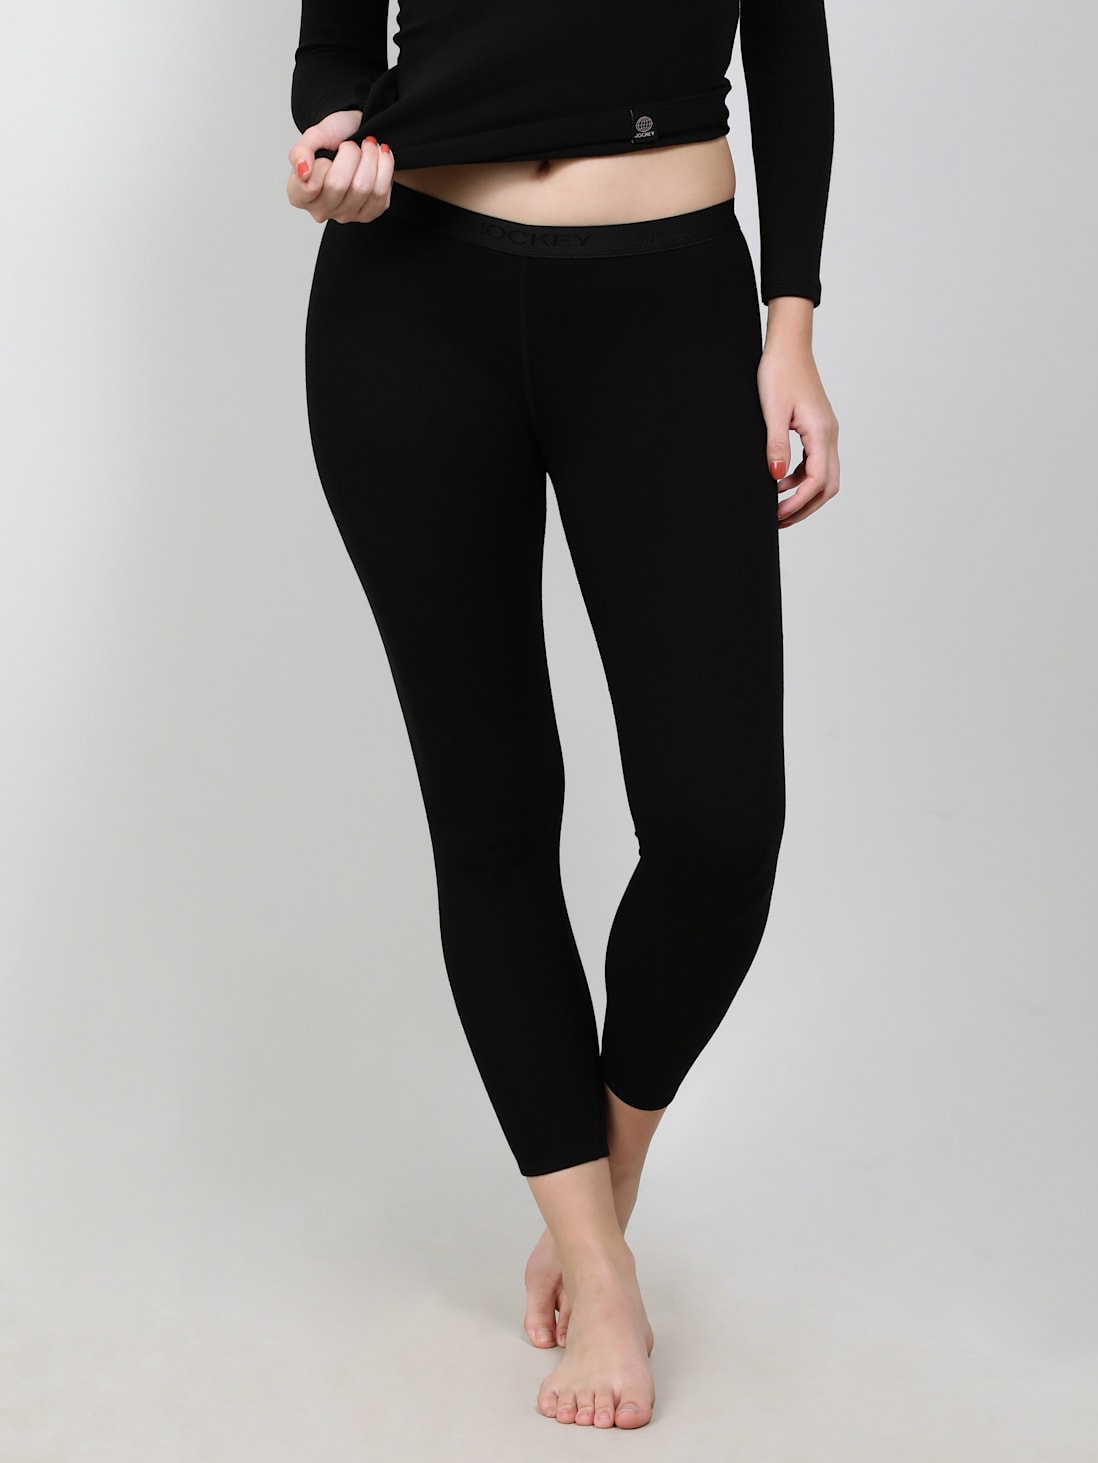 Buy Women's Soft Touch Microfiber Elastane Stretch Leggings with